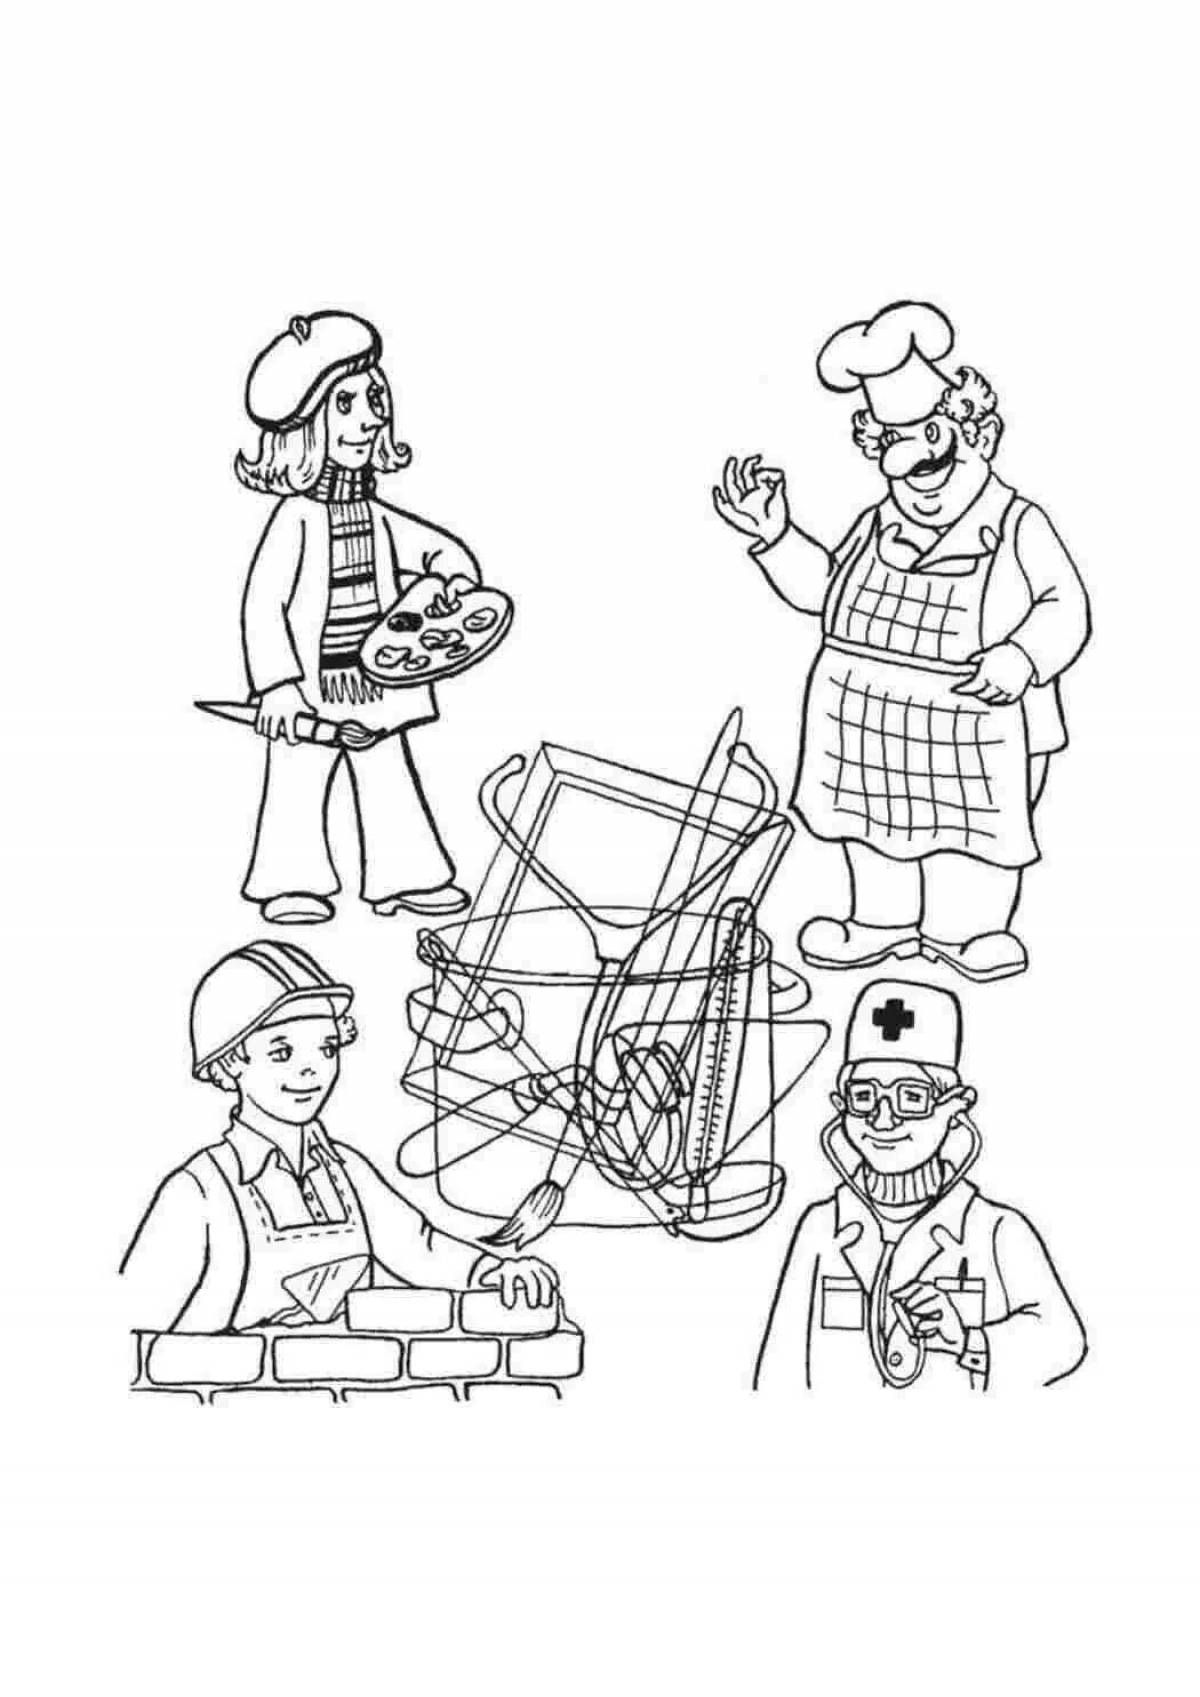 Attractive job coloring pages for schoolchildren